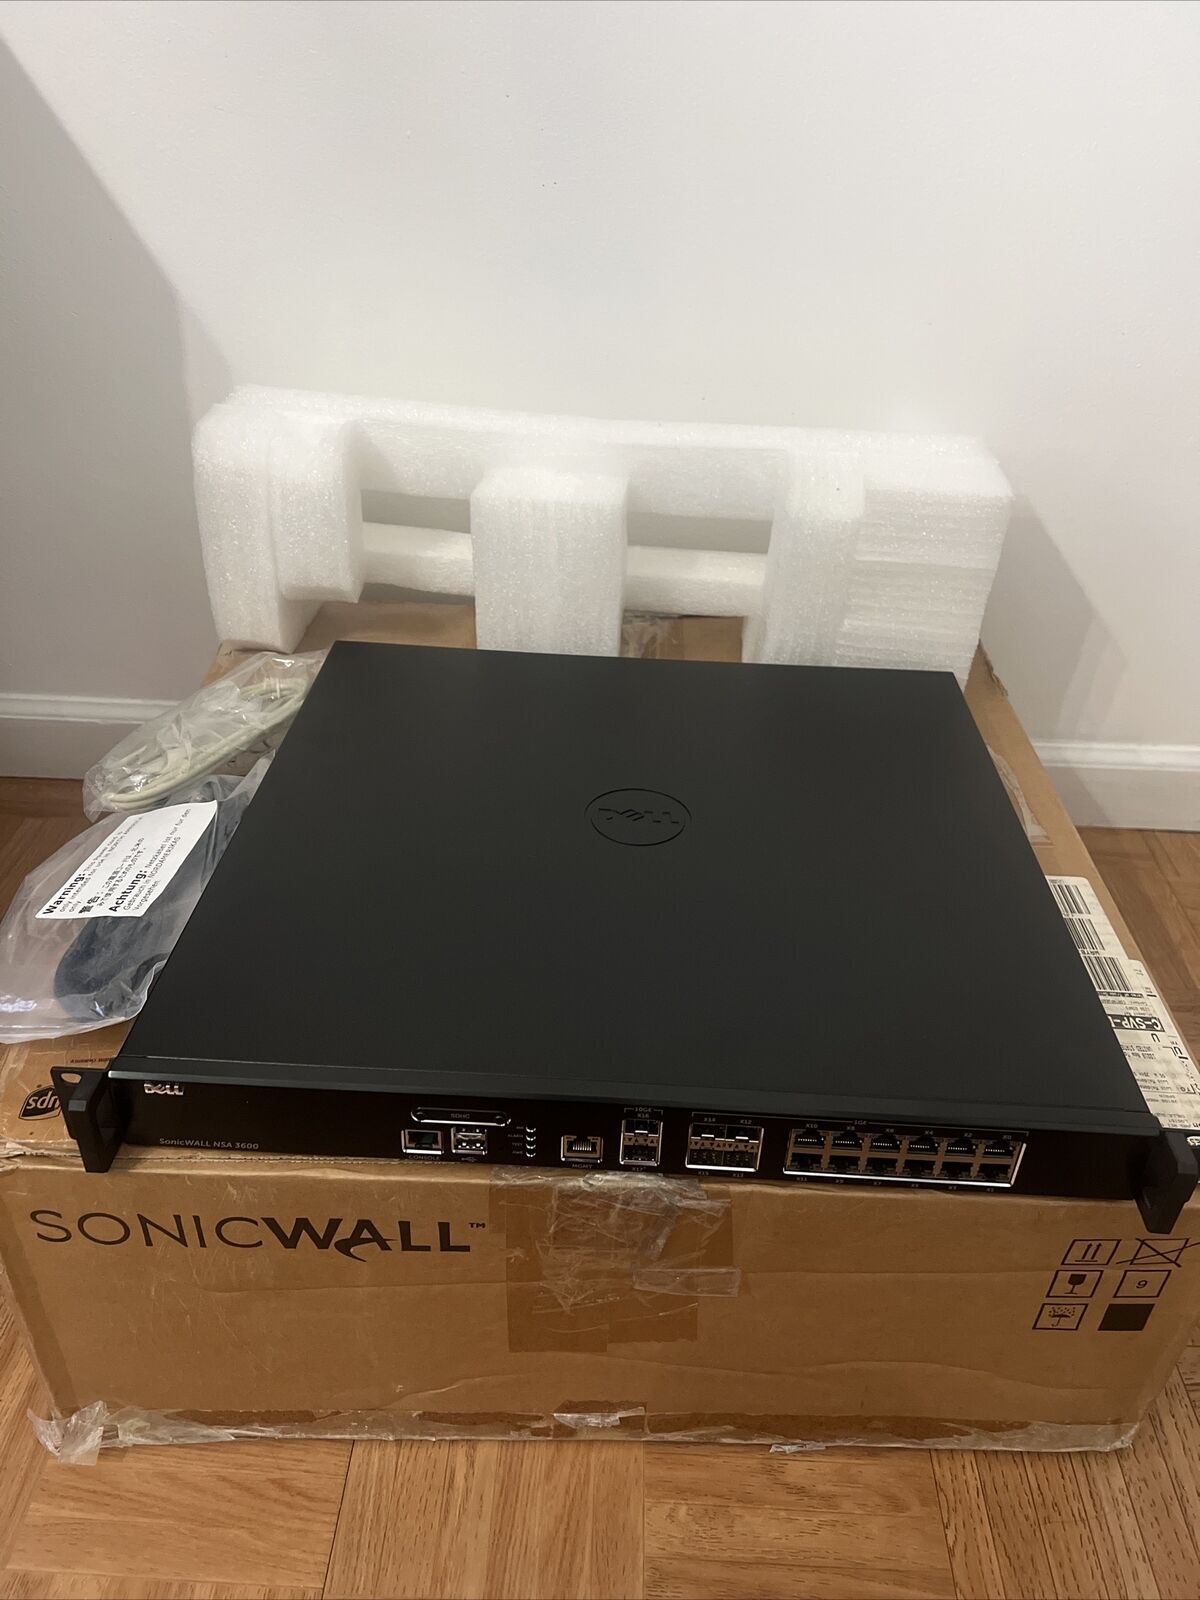 SonicWALL NSA 3600 Network Security/Firewall Appliance Dell/01-SSC-3850